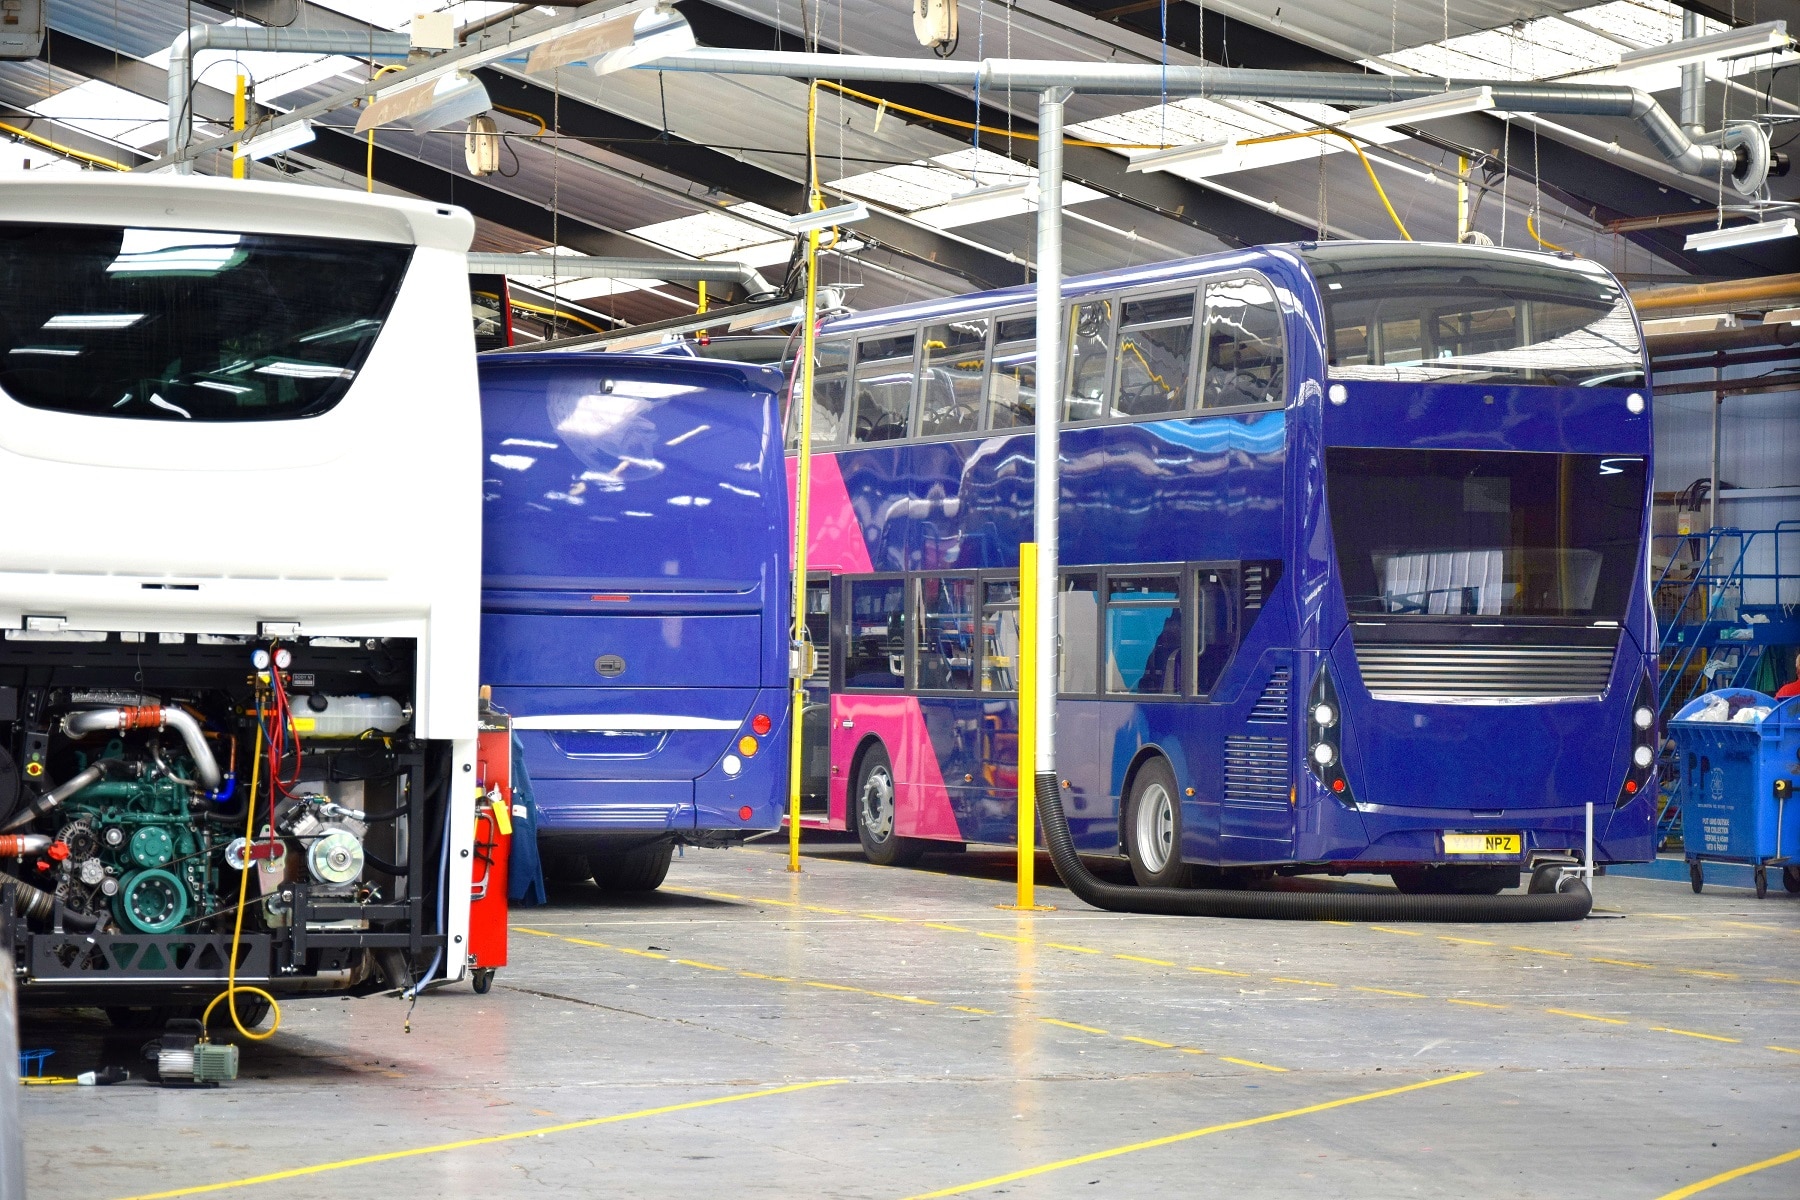 The fight for talent is real, ADL HR Director tells coach and bus industry